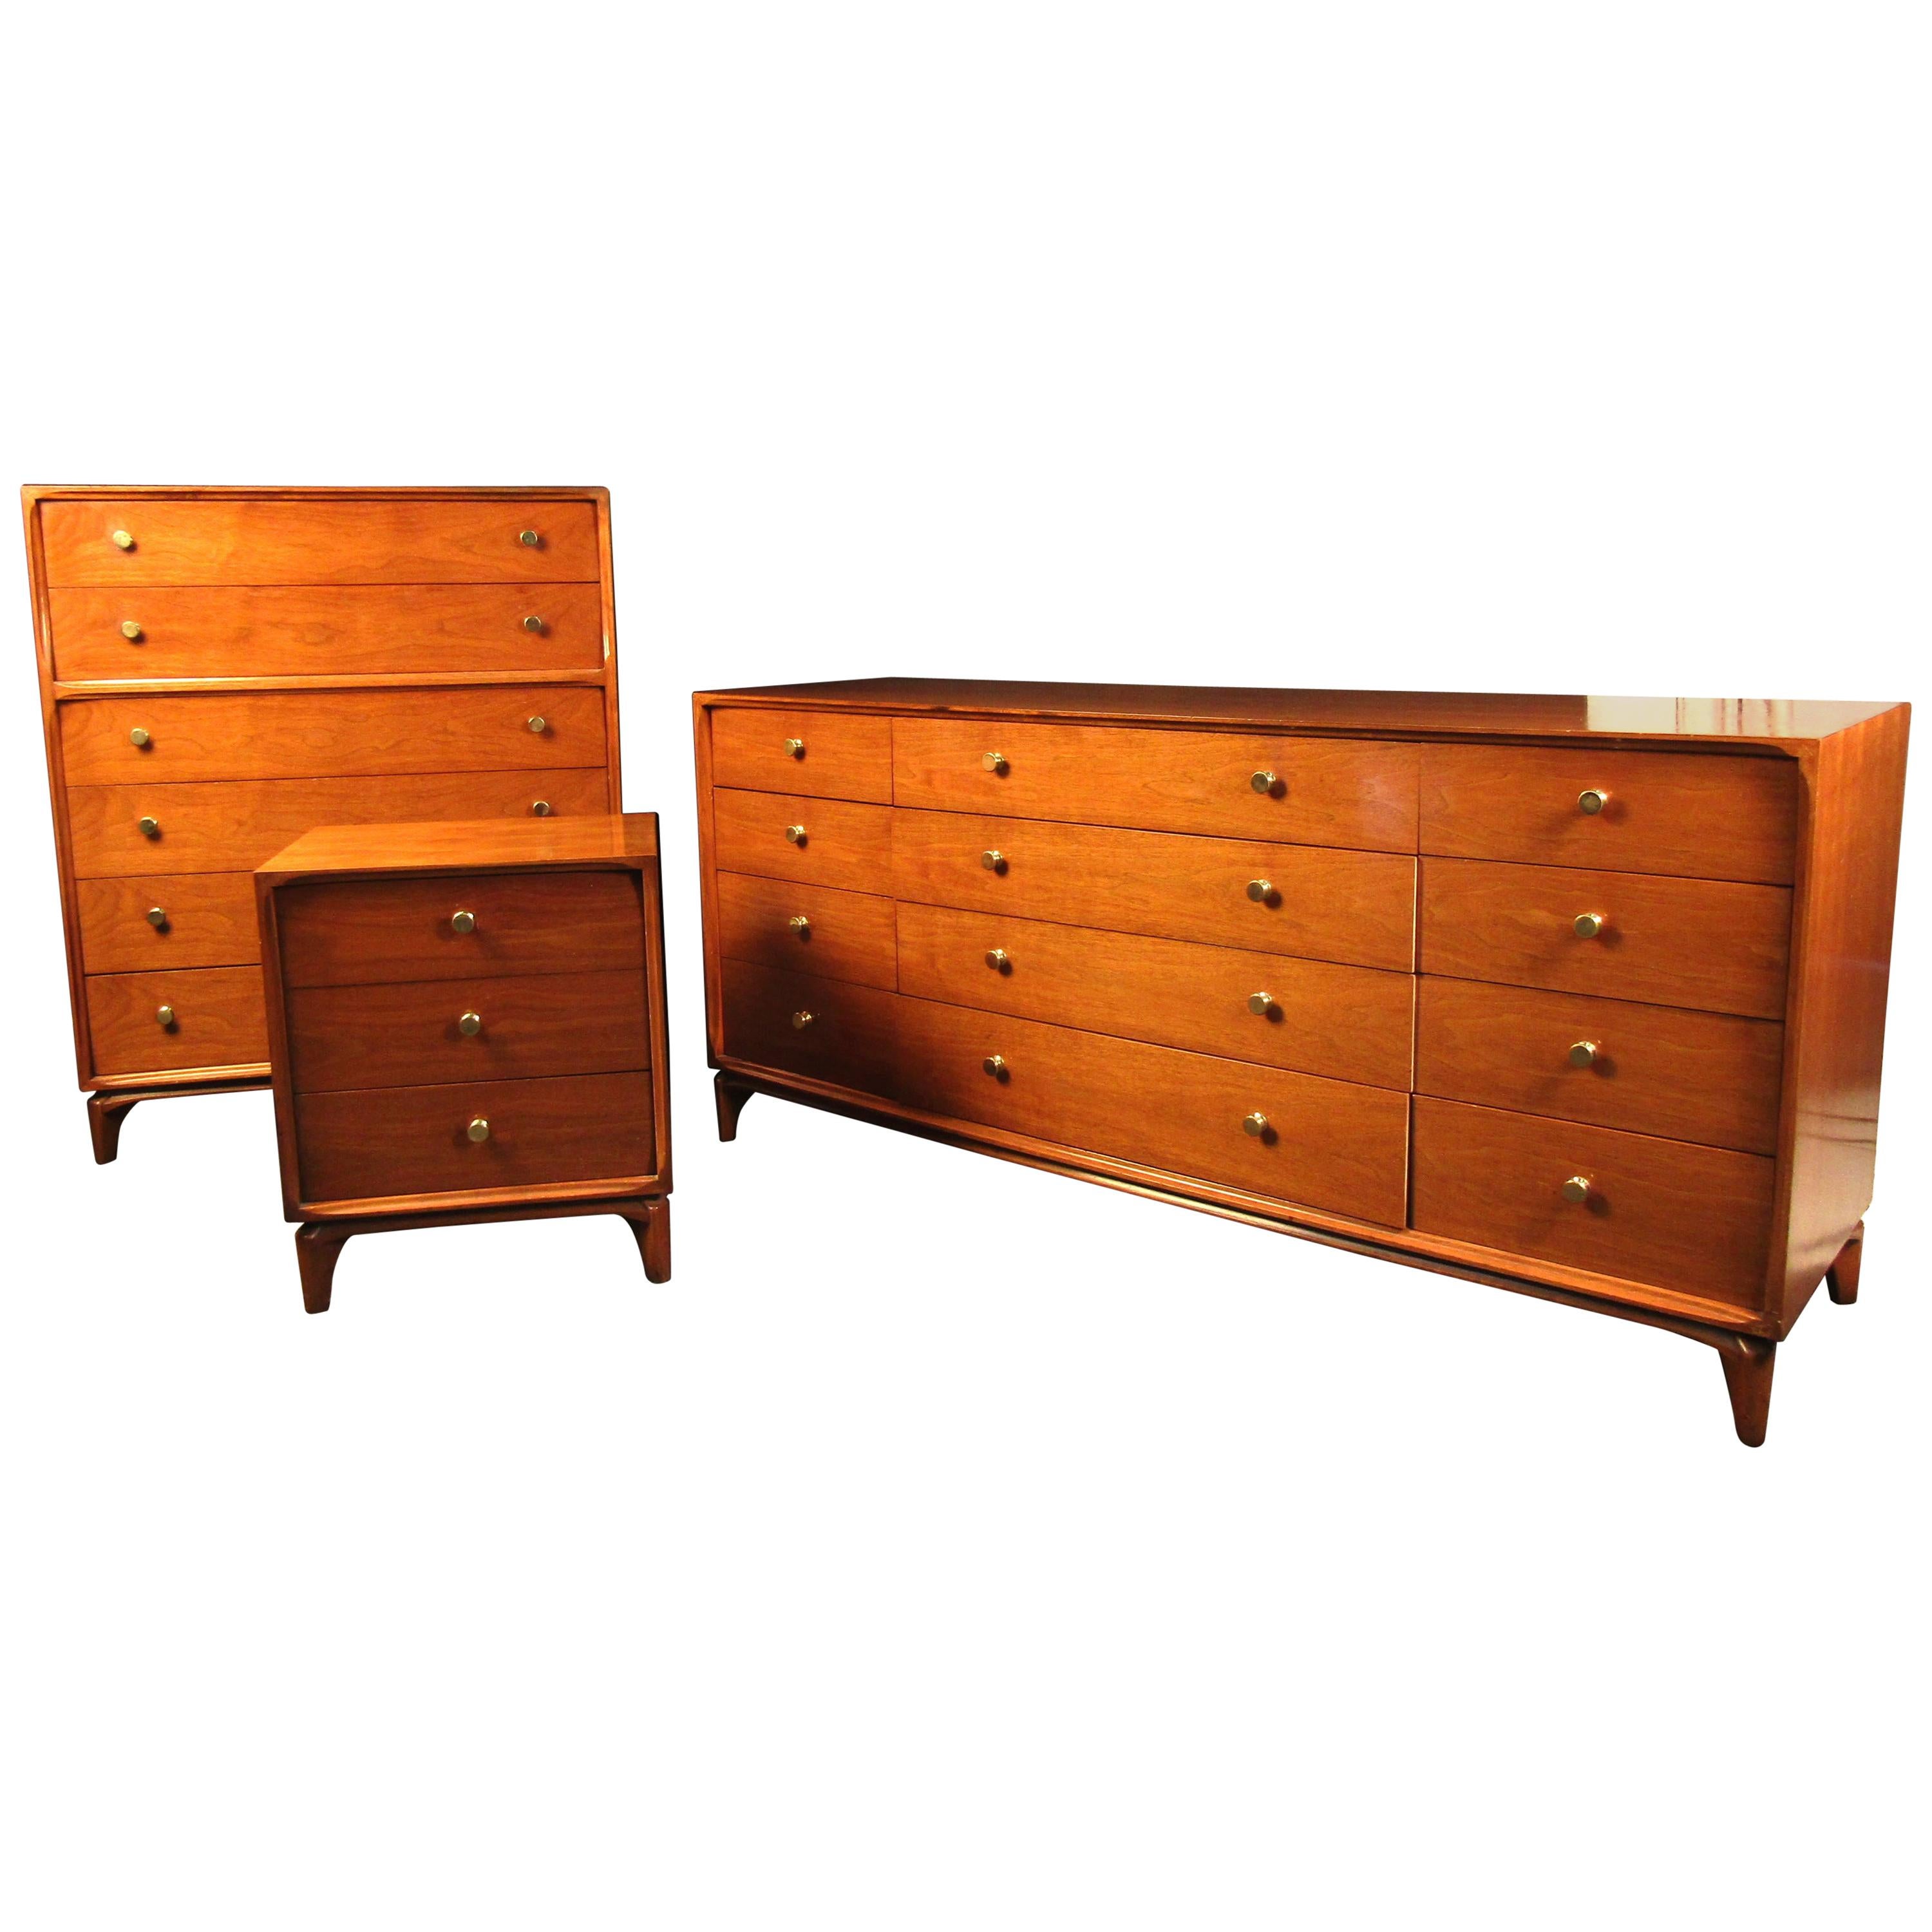 Stunning Mid-century Bedroom Set by "Exclusively Yours" For Sale